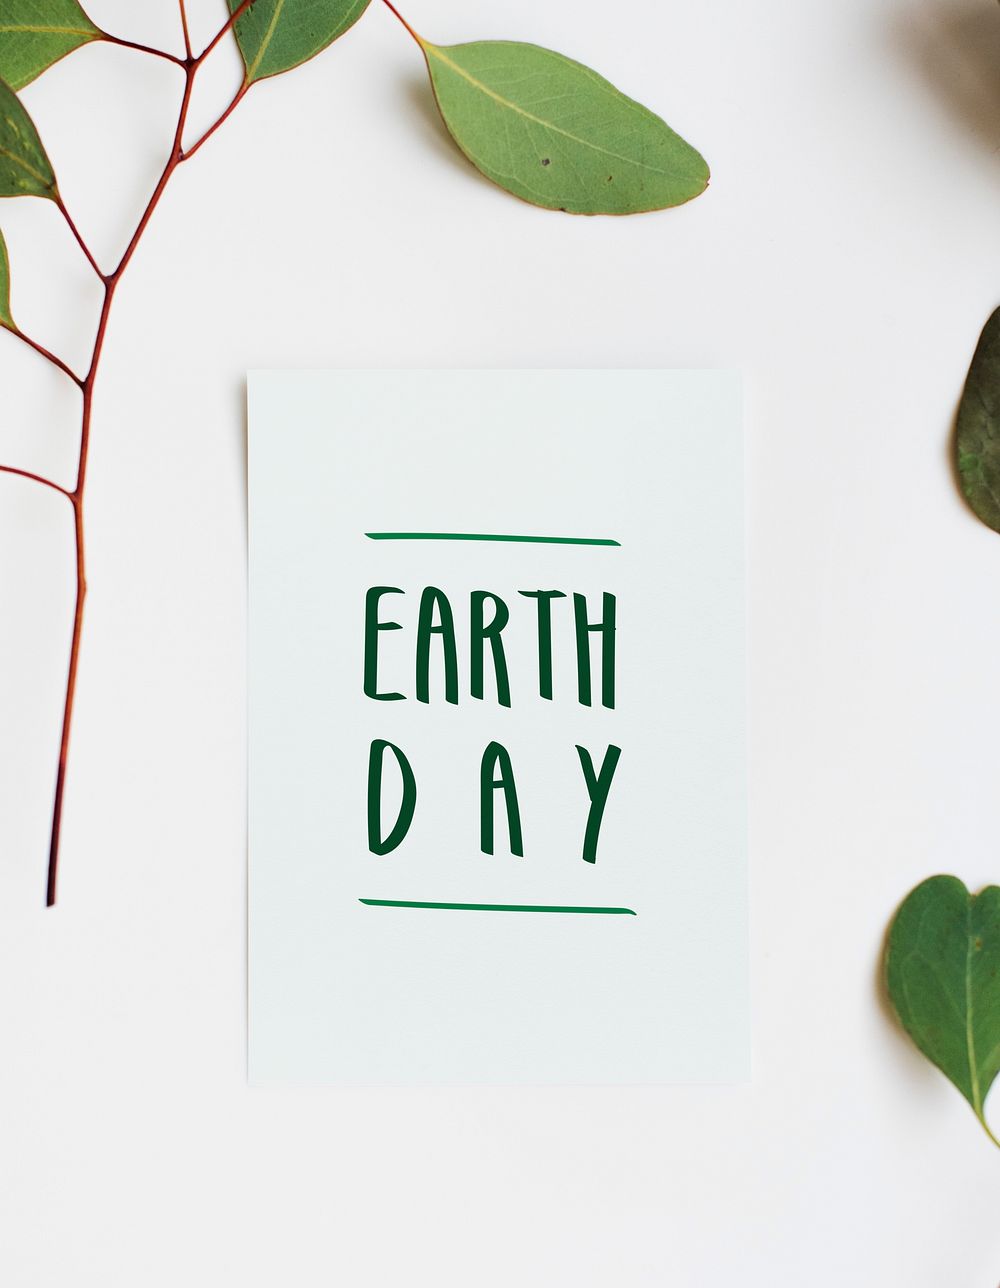 Earth day card supporting environmental protection